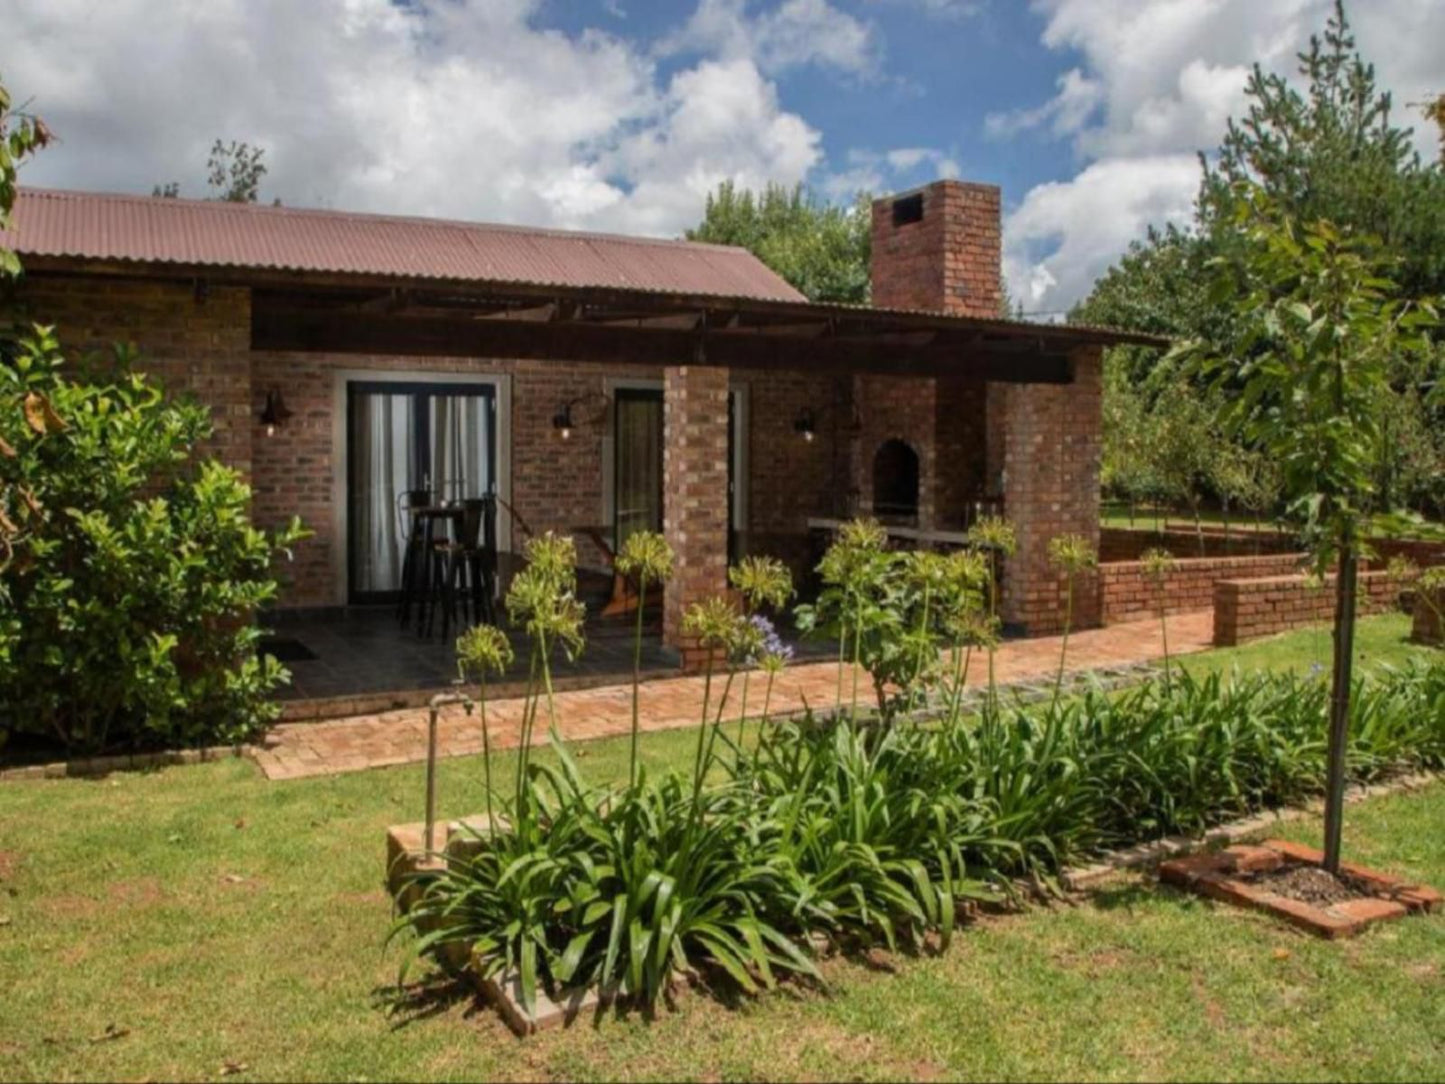 Tarry Stone Cottages Dullstroom Mpumalanga South Africa House, Building, Architecture